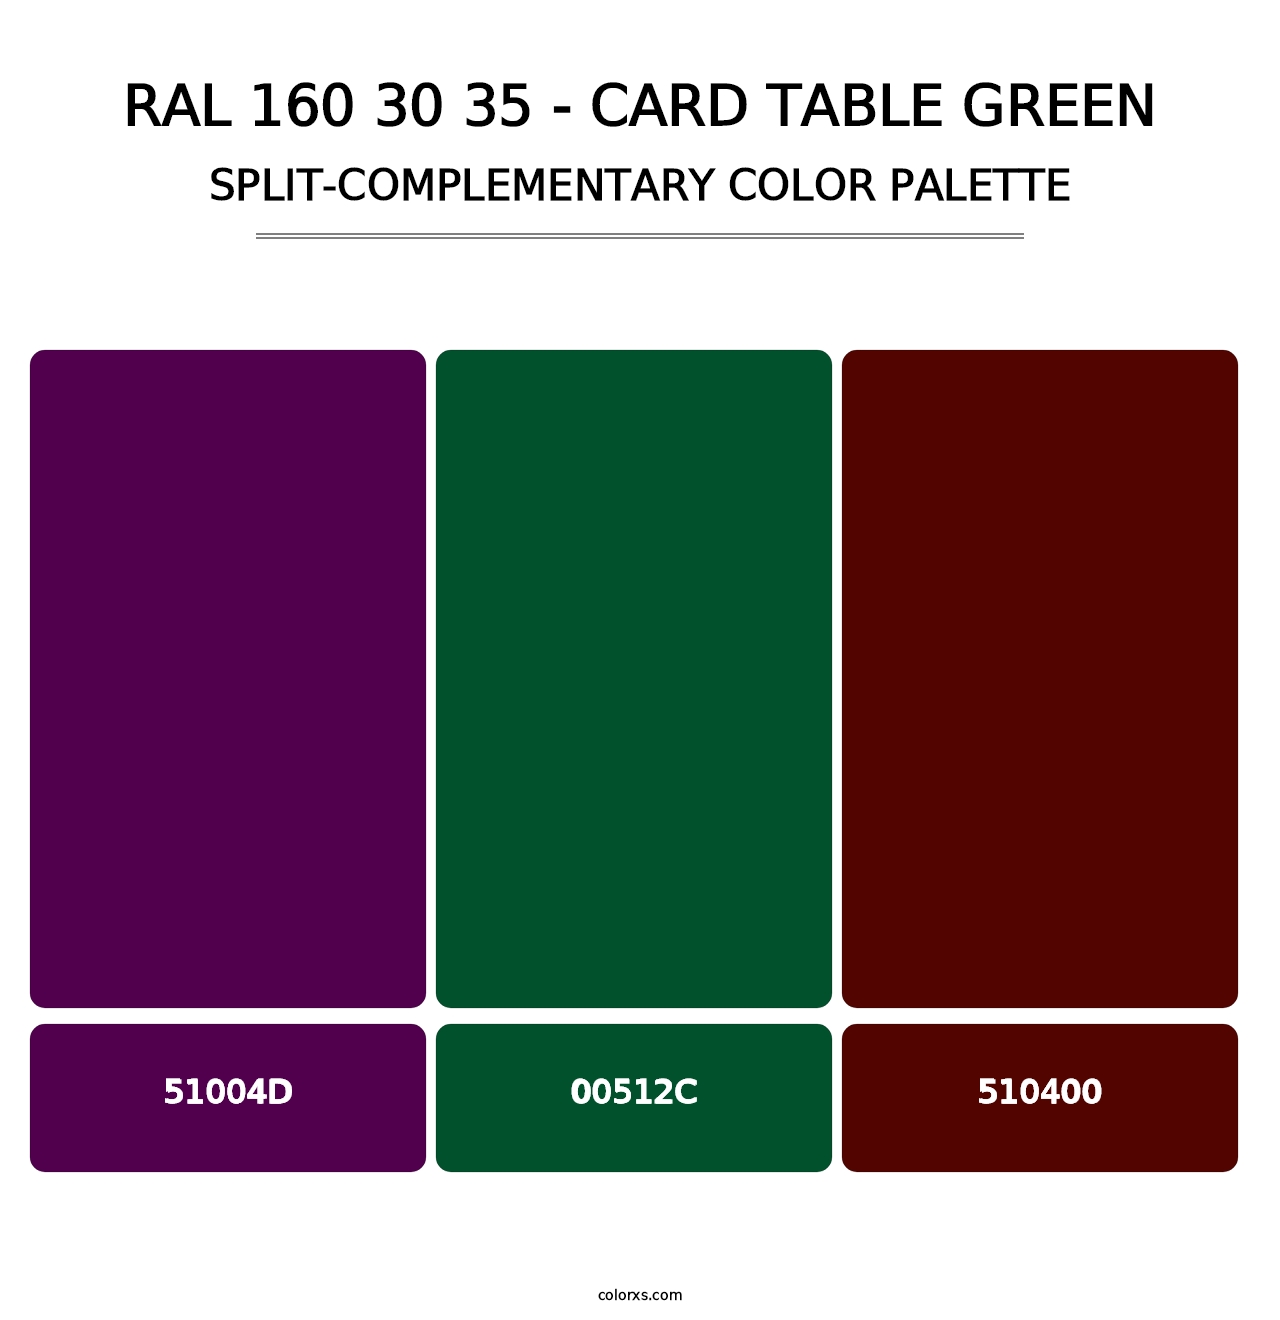 RAL 160 30 35 - Card Table Green - Split-Complementary Color Palette